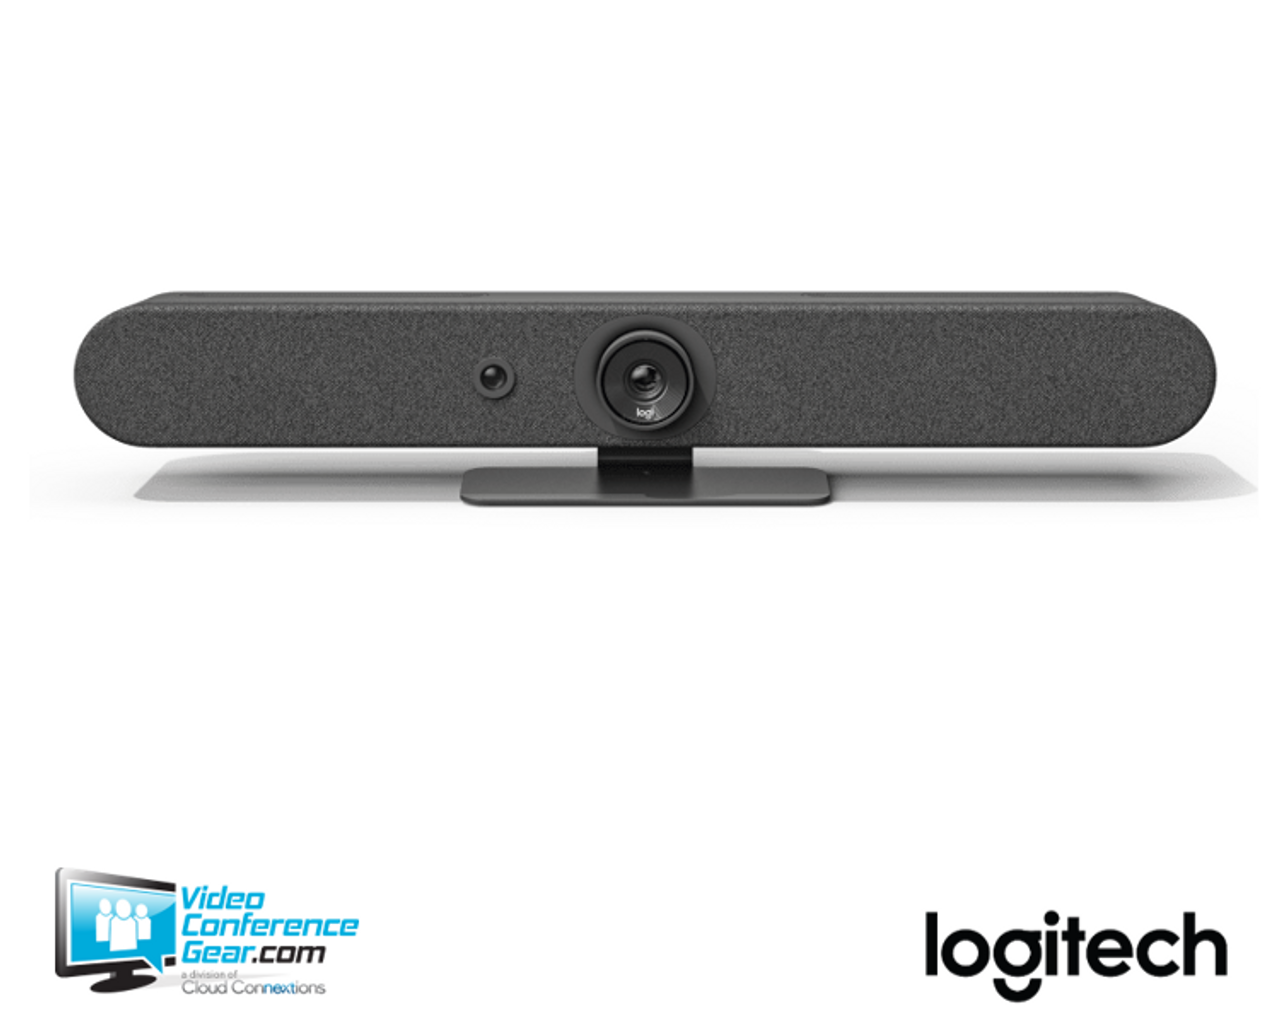 Rally Bar Mini Video Conferencing Appliance and All-in-One Soundbar from Logitech For Zoom and Microsoft Teams